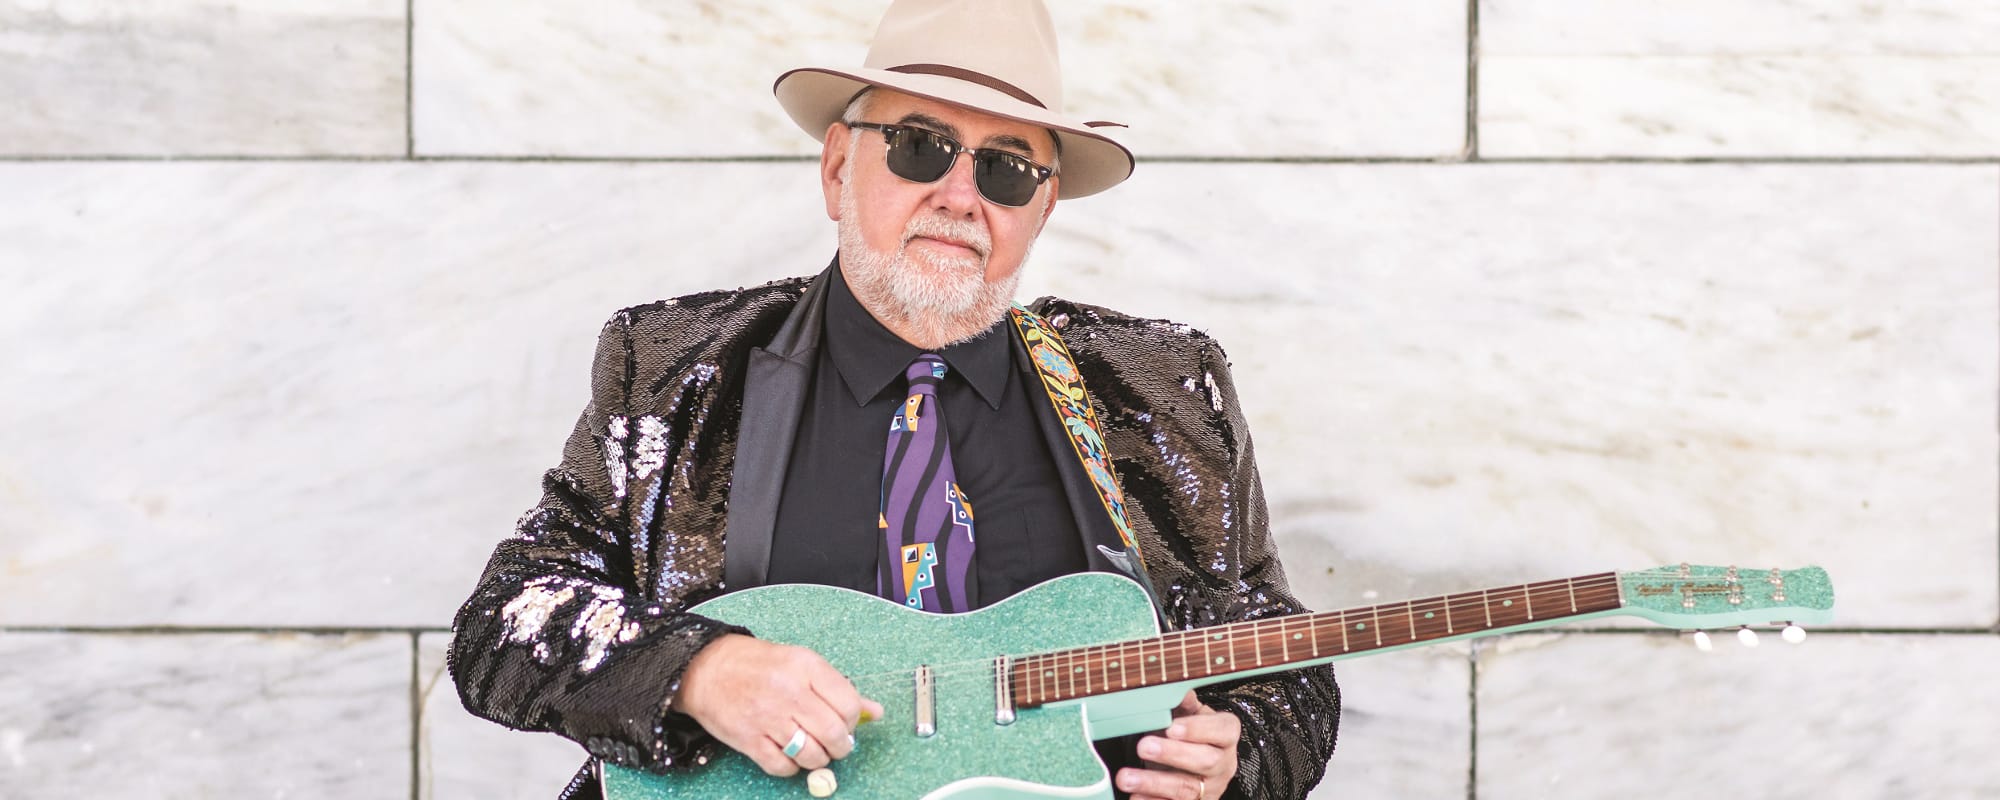 Duke Robillard Finds Cause To Have a ‘Blues Bash’ in the Midst of the Pandemic